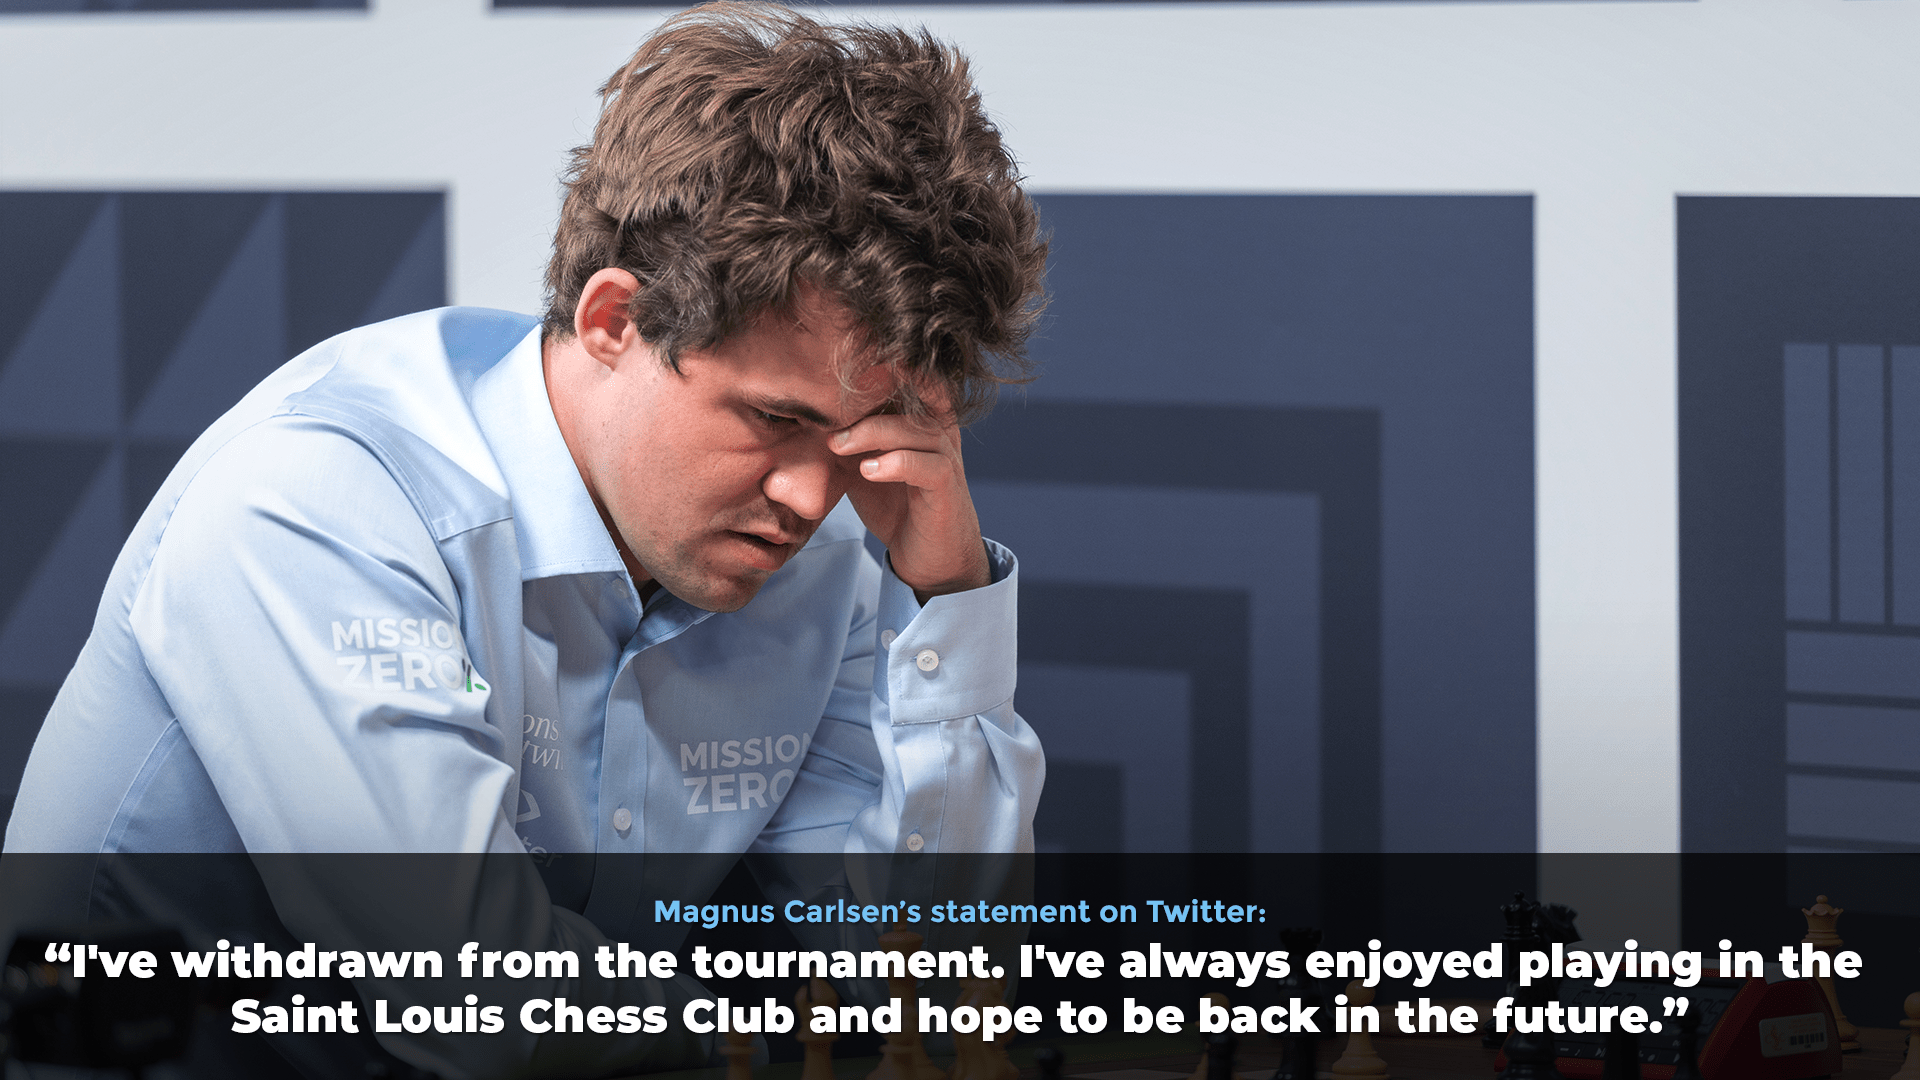 Magnus Carlsen Withdraws From Sinquefield Cup